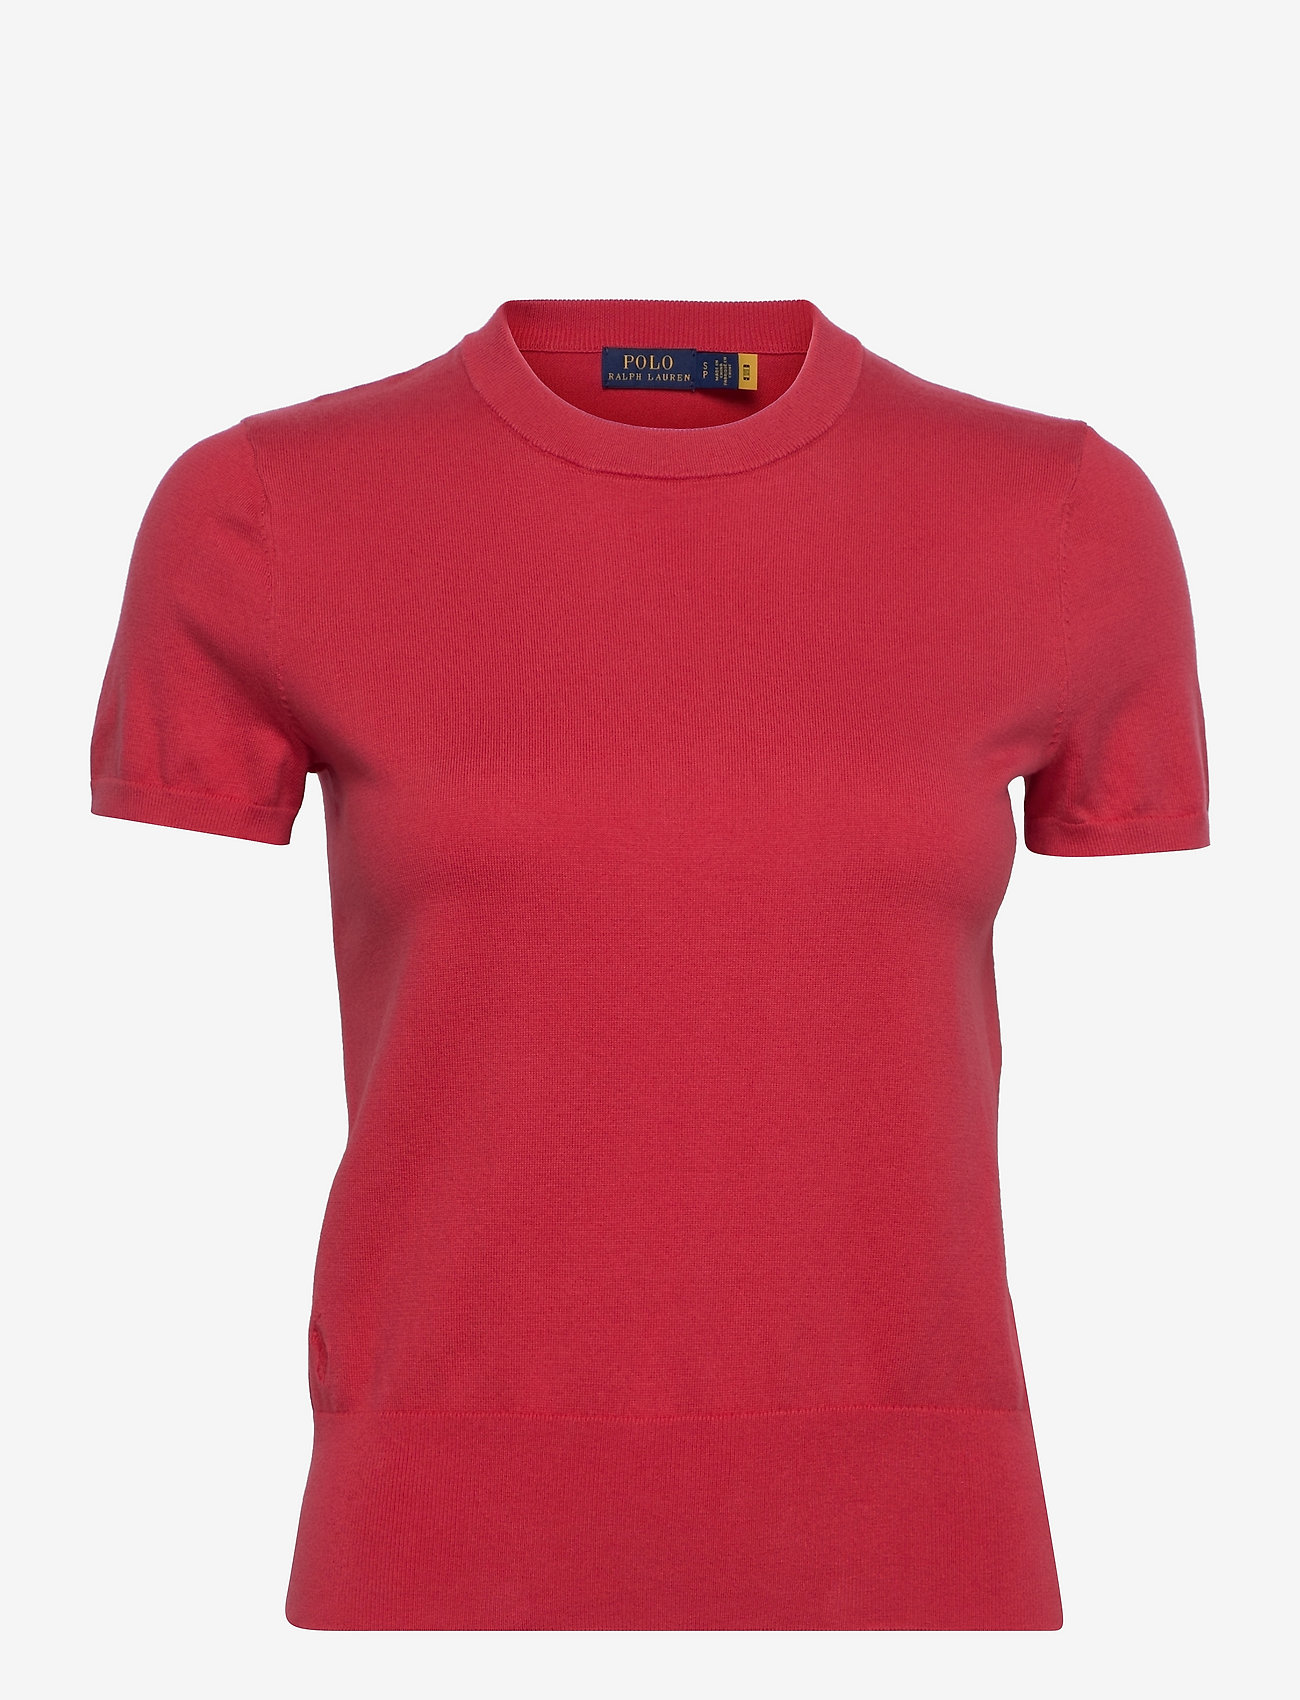 Polo Ralph Lauren - Cotton-Blend Short-Sleeve Sweater - jumpers - starboard red - 0